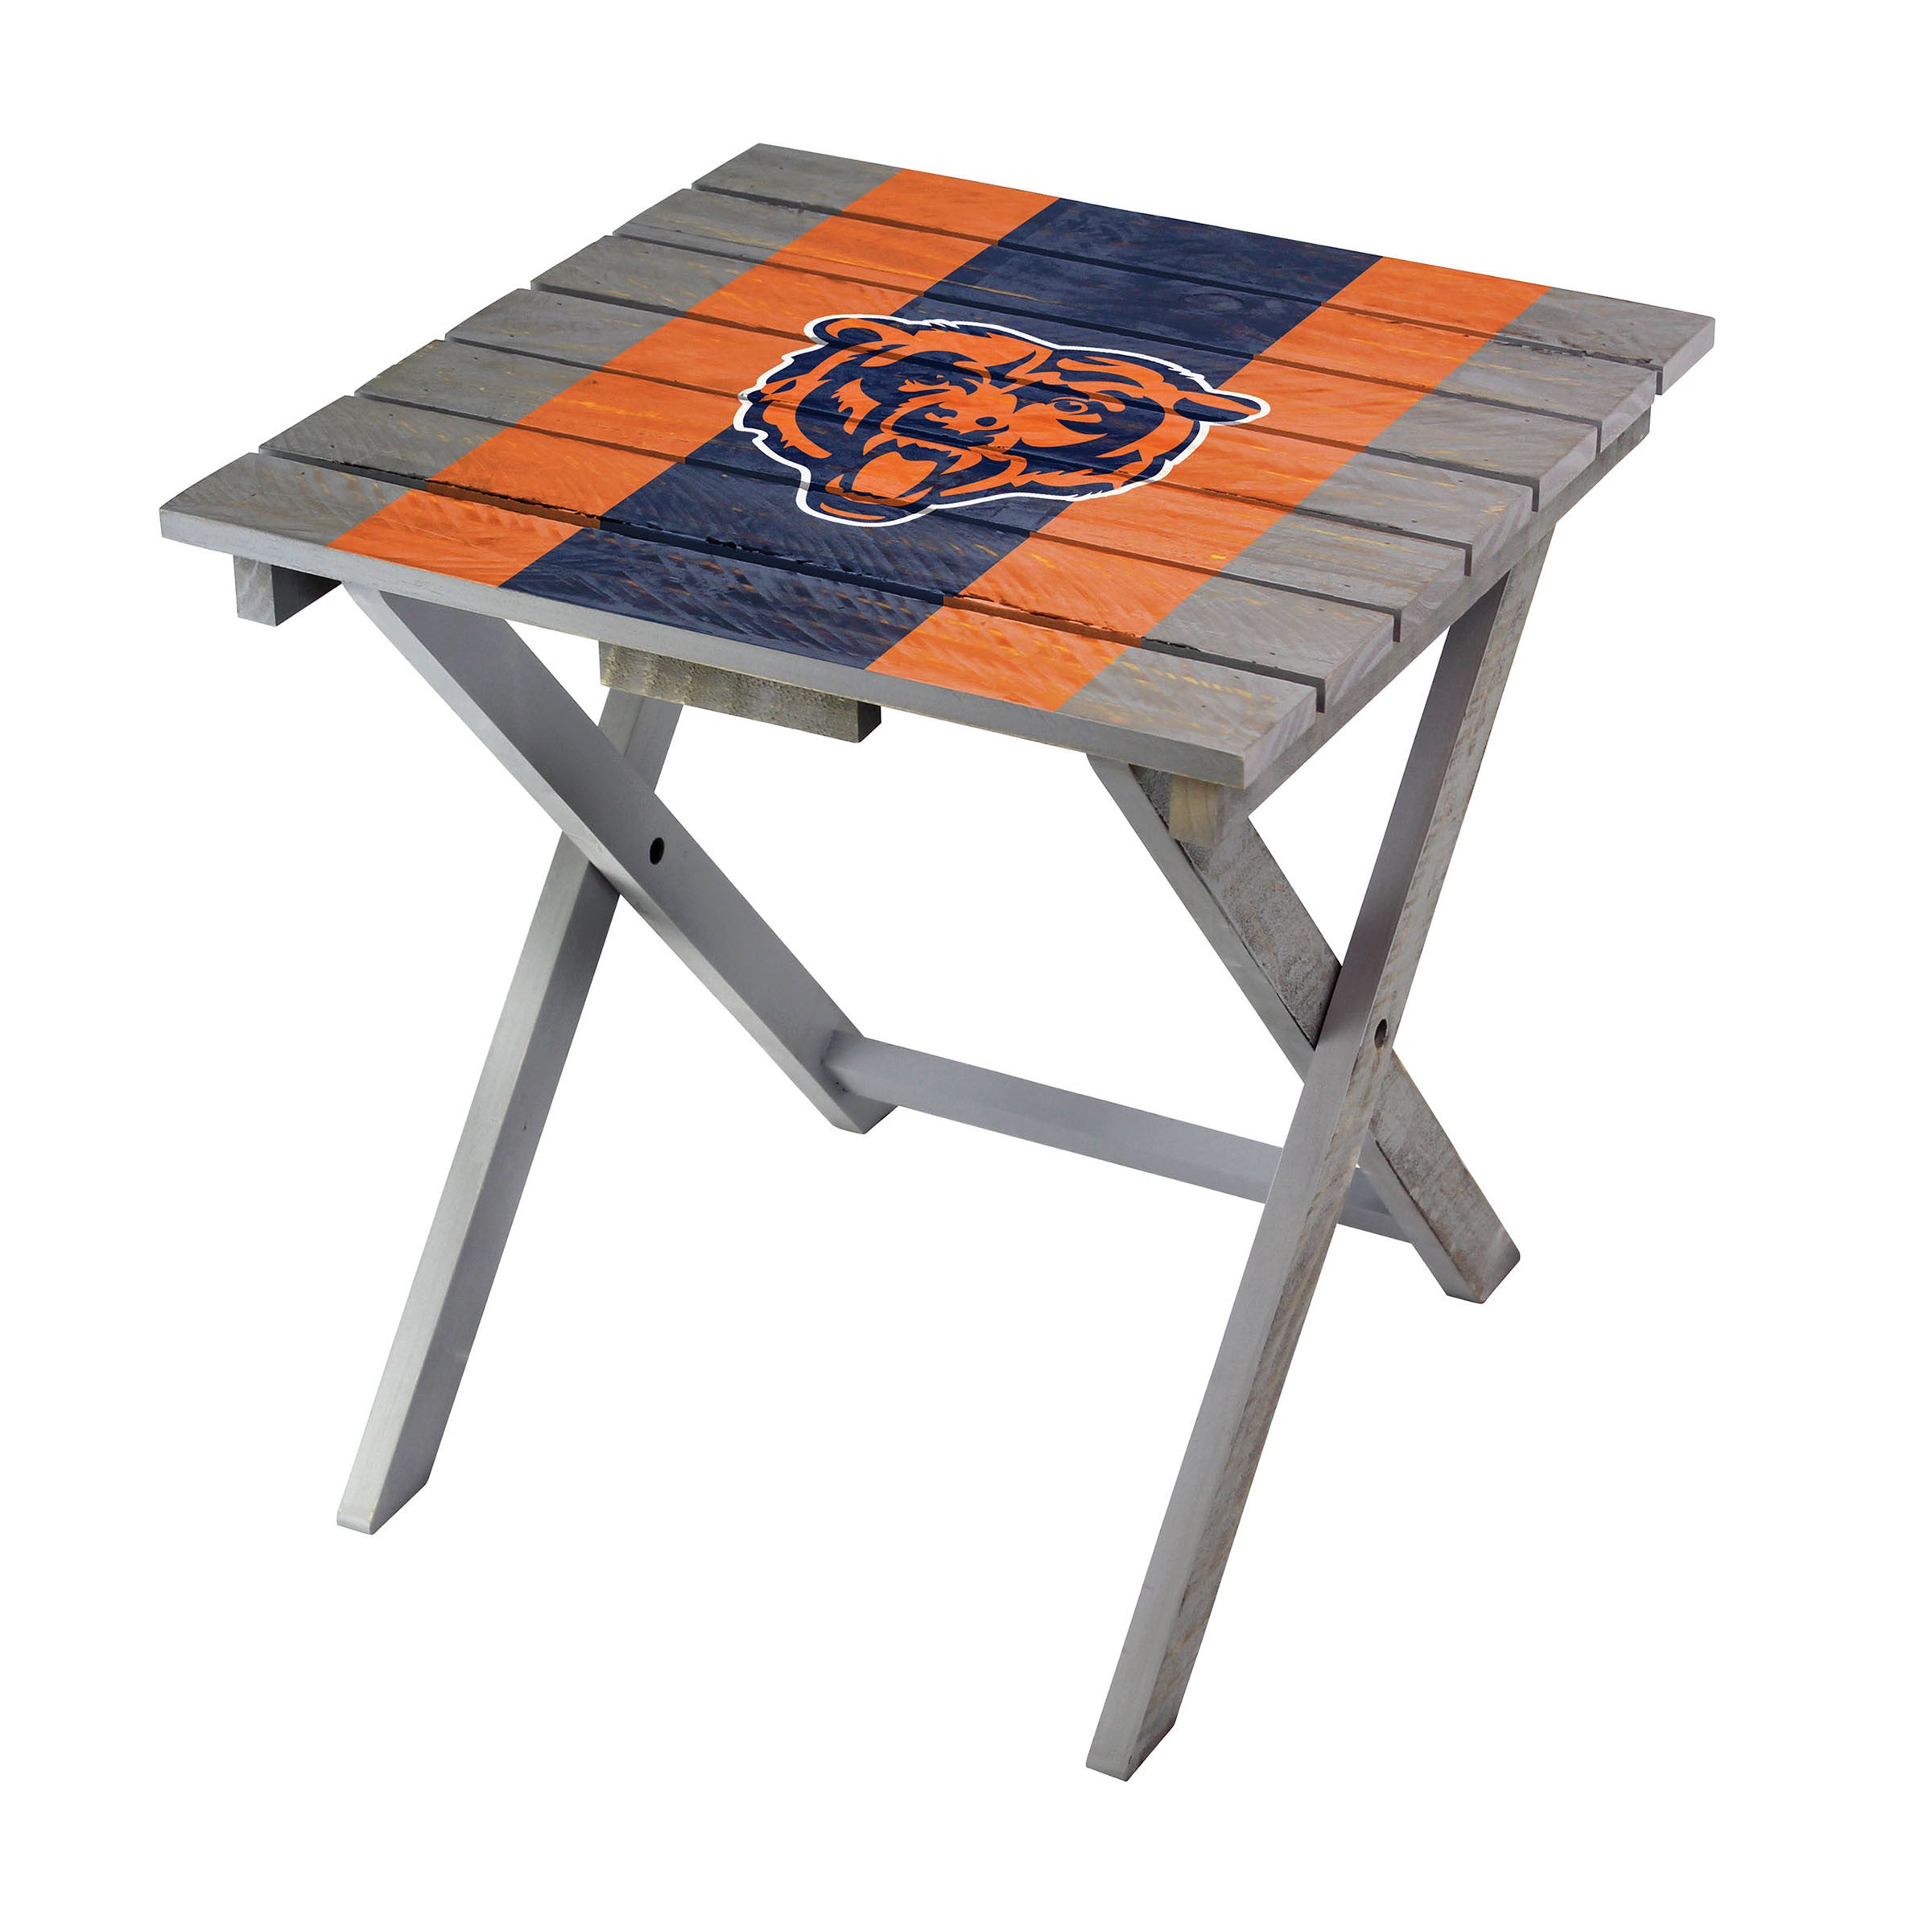 Imperial Chicago Bears Folding Adirondack Table